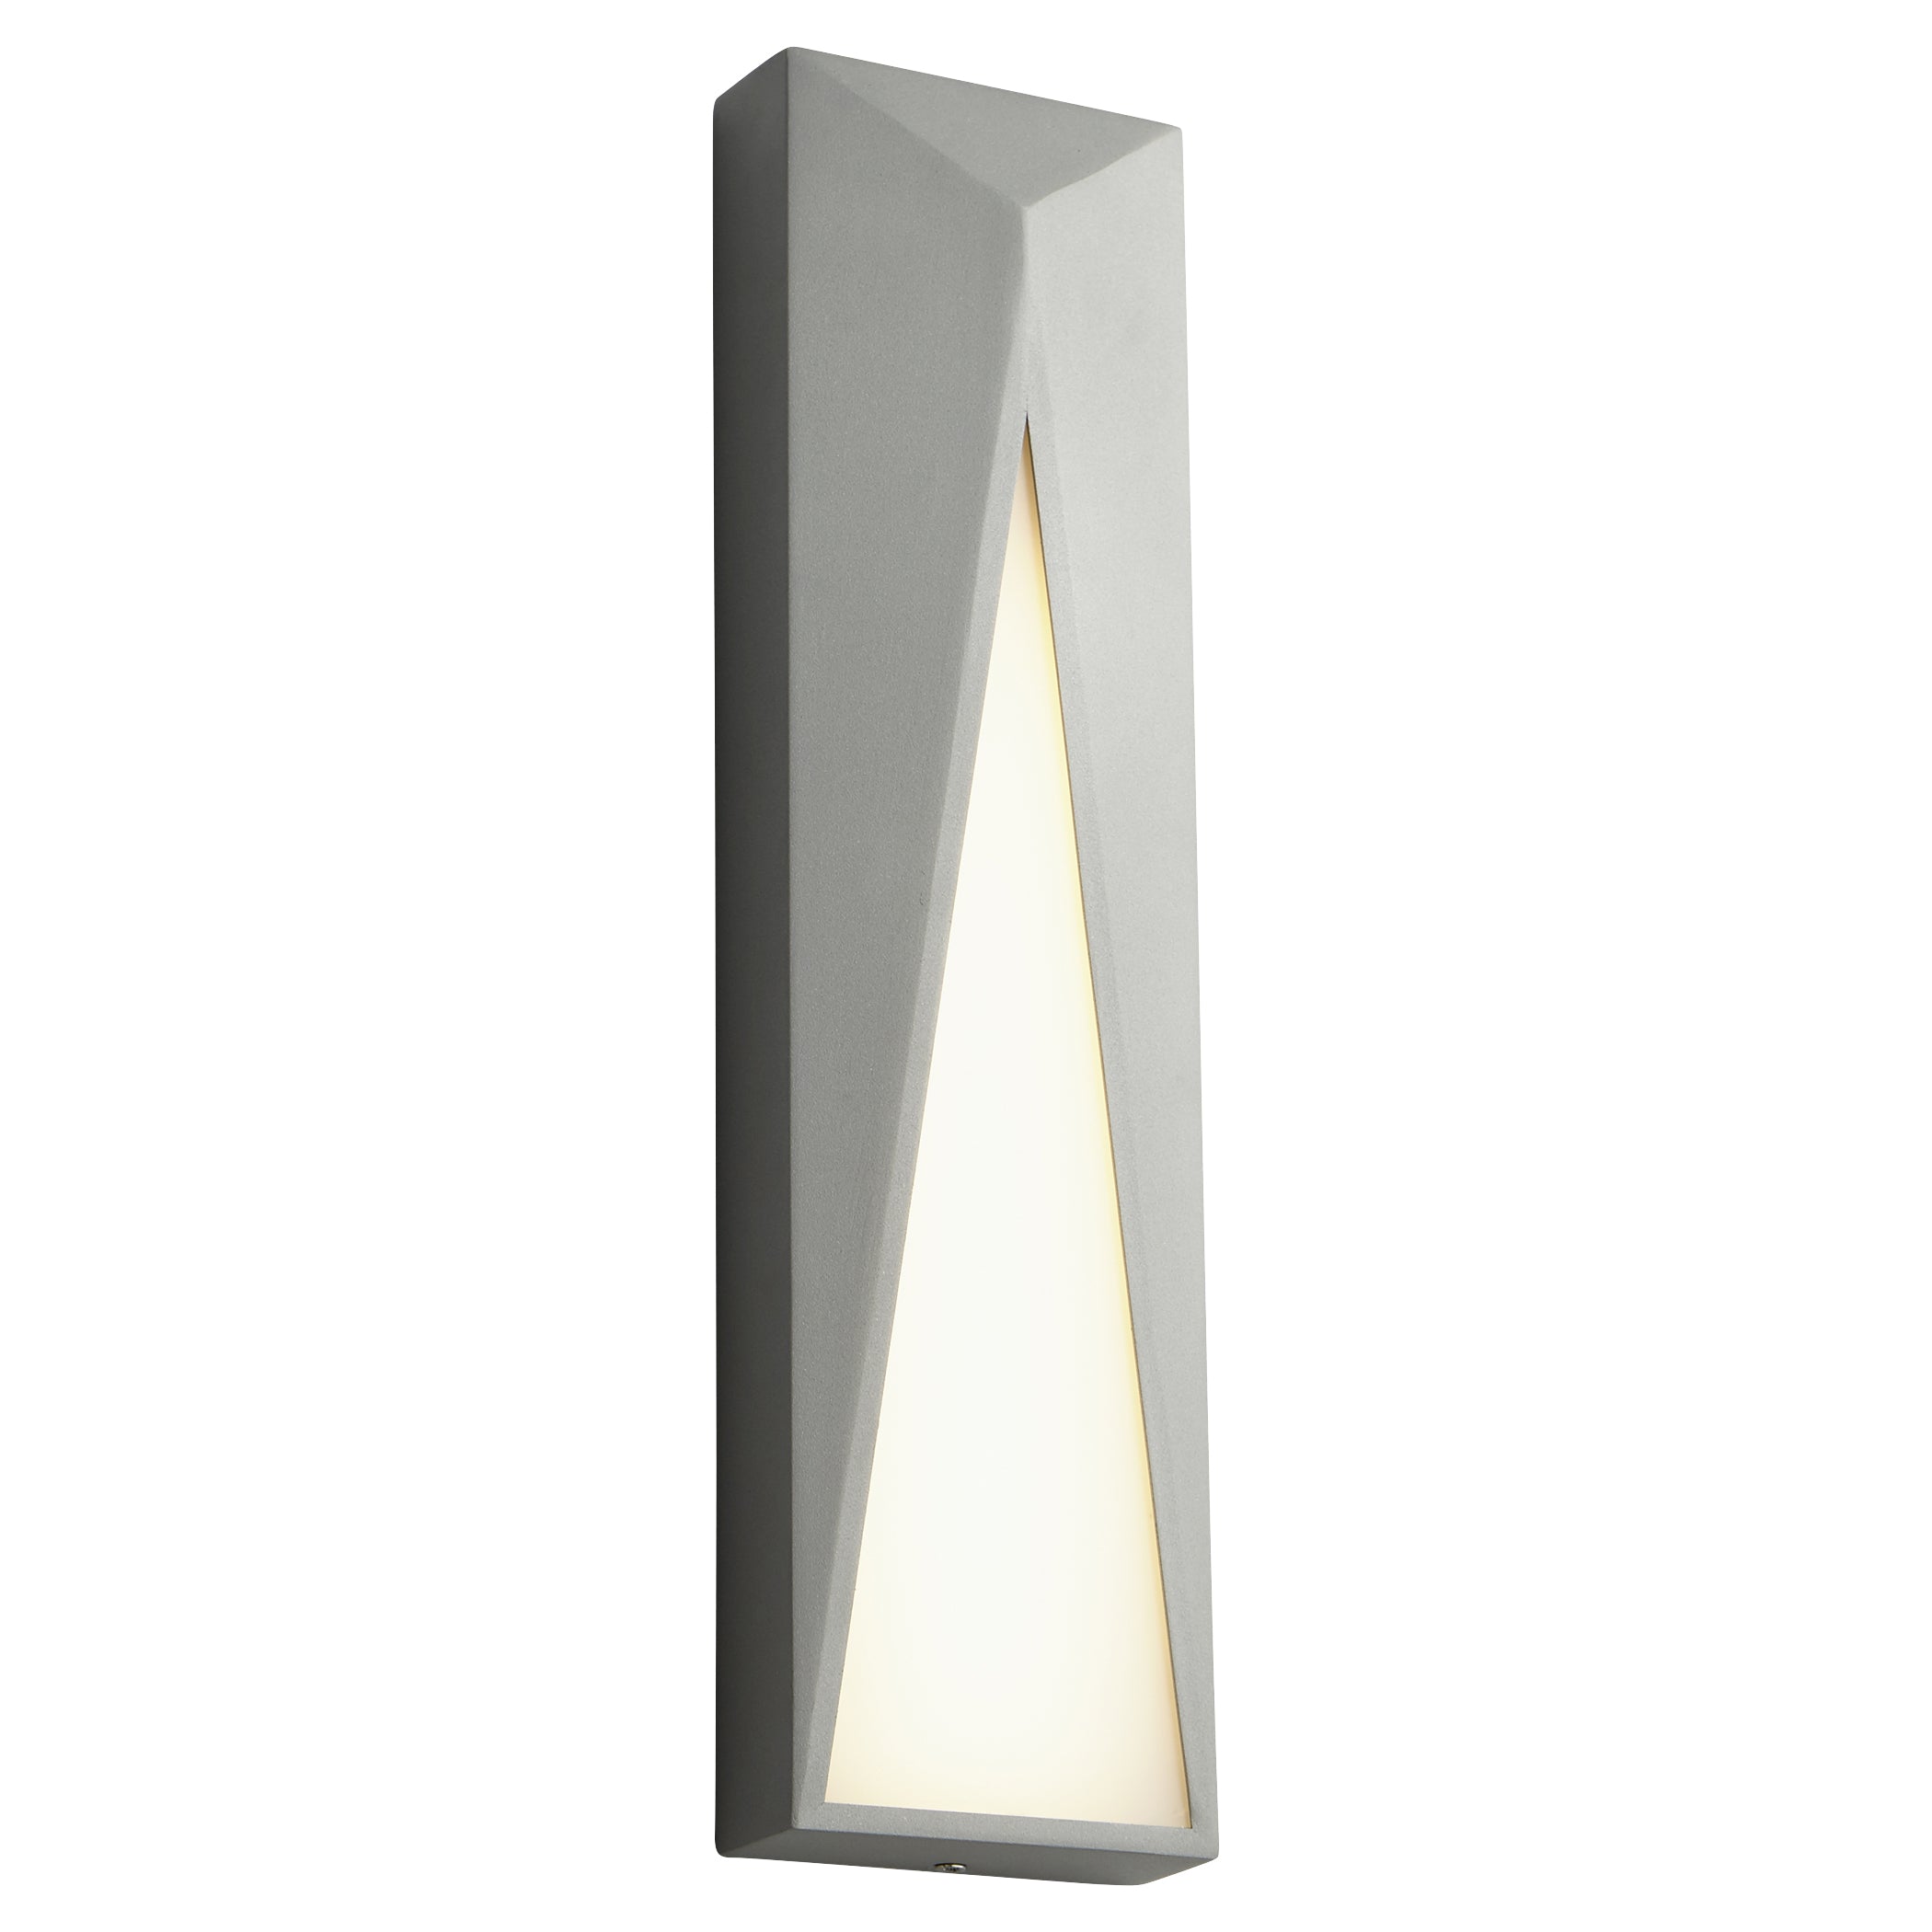 Oxygen Elif 3-736-16 Outdoor Wall Sconce Light - Grey